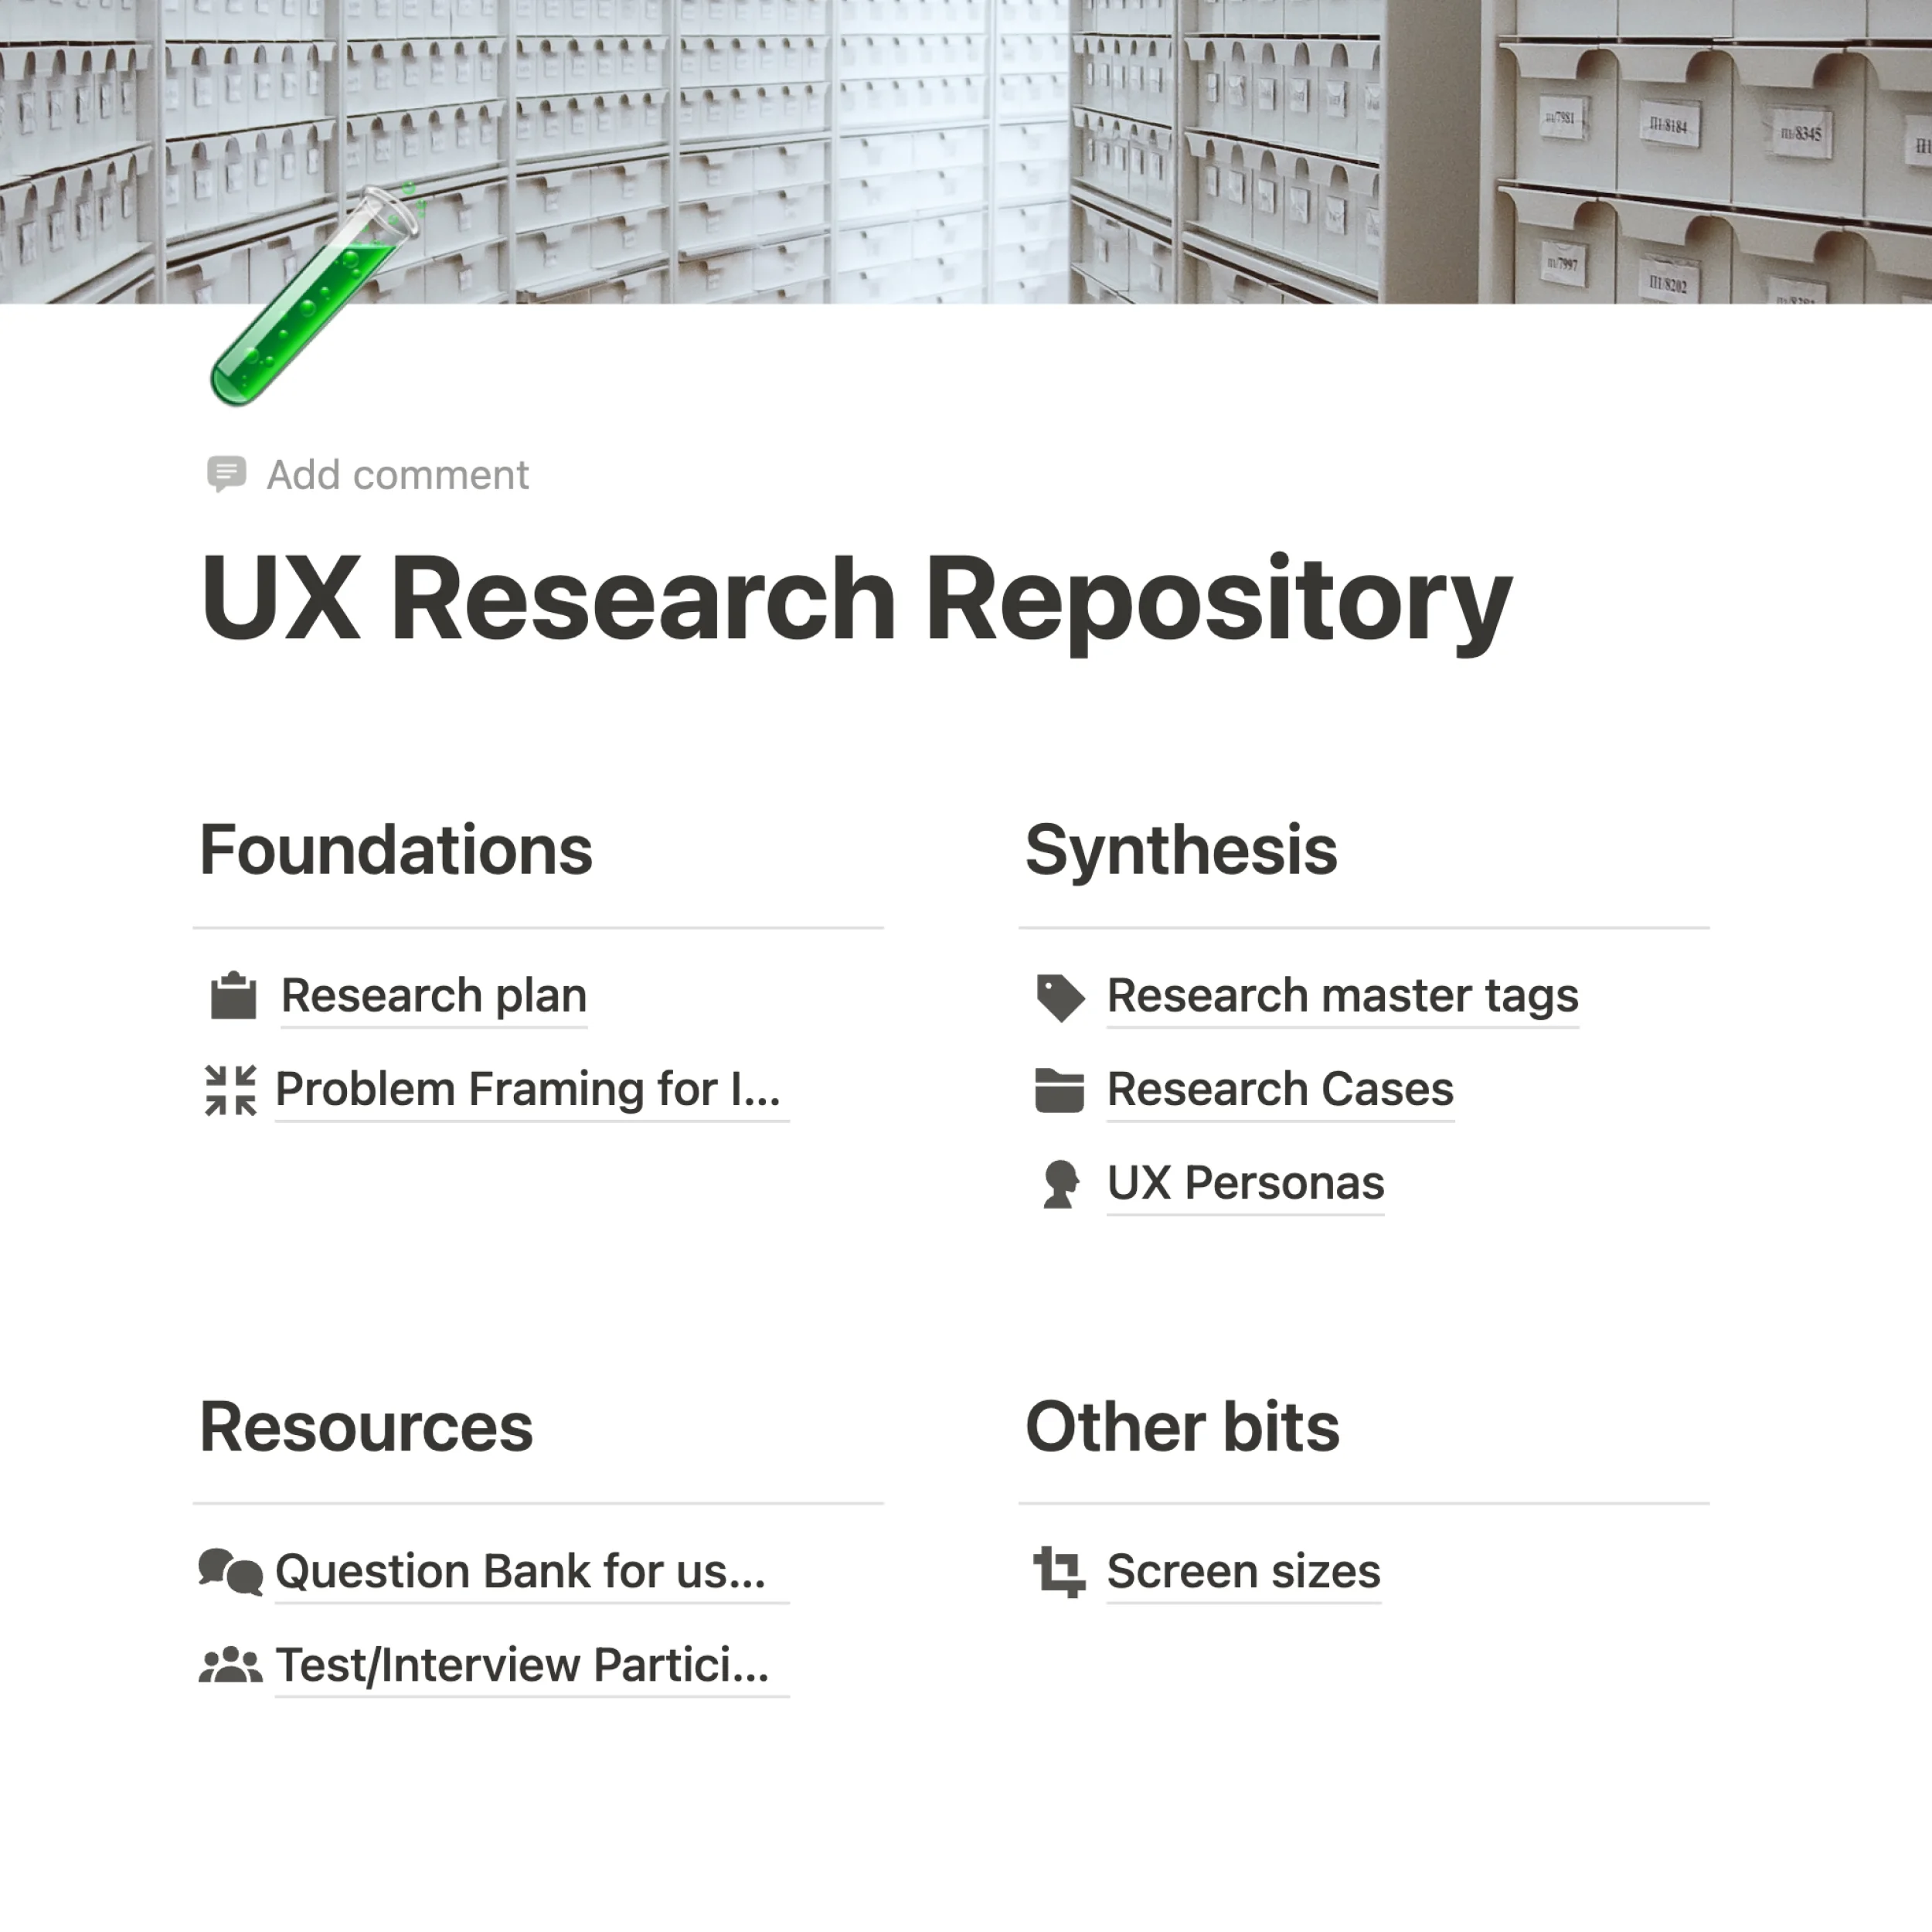 Documentation snippet of the UX Research Repository home page.